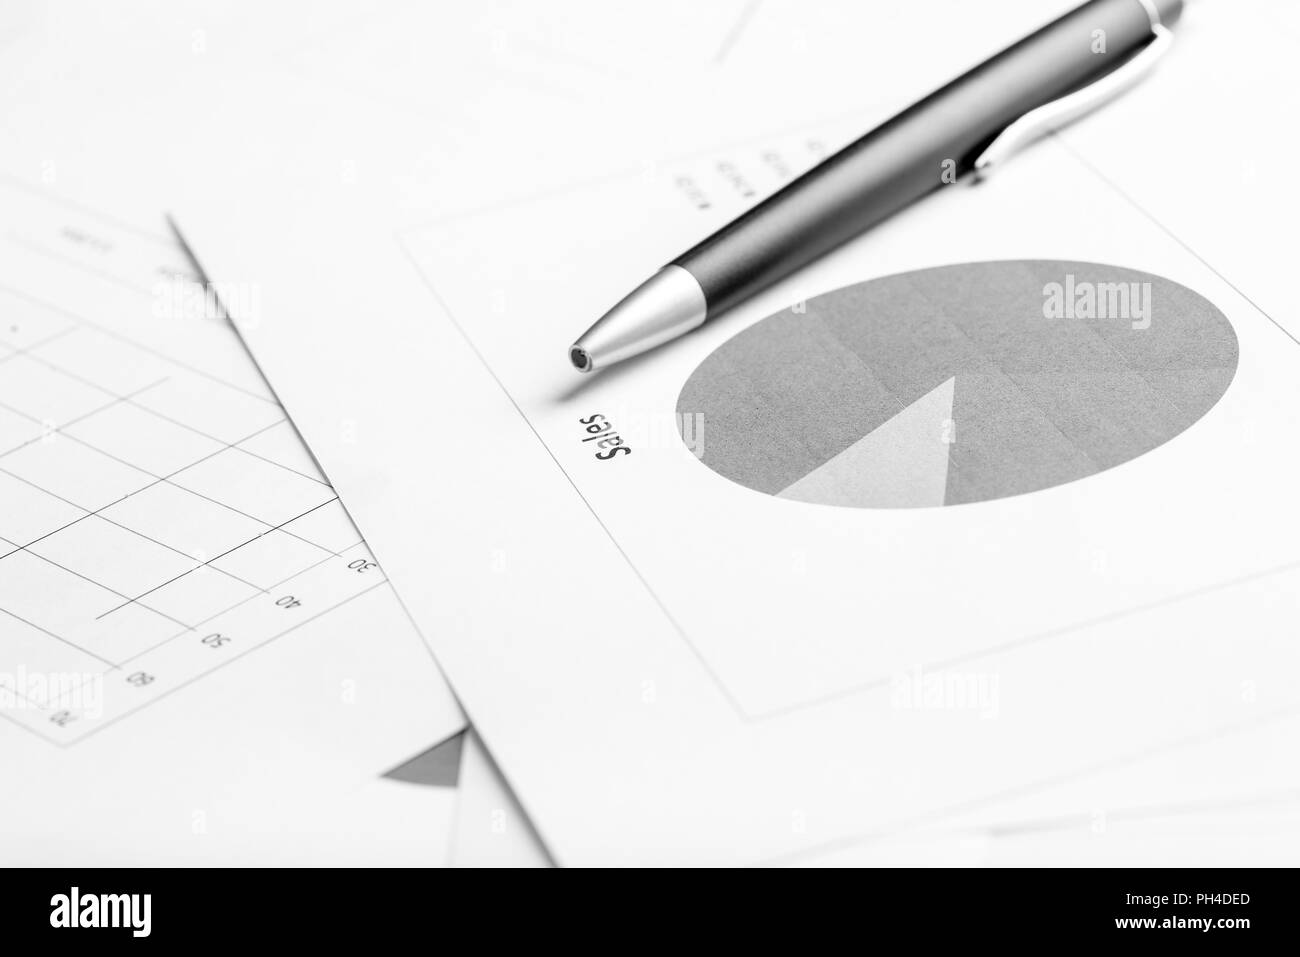 Monochrome image of ballpoint pen lying on a business document with pie graph, focus to the text Sale. Stock Photo